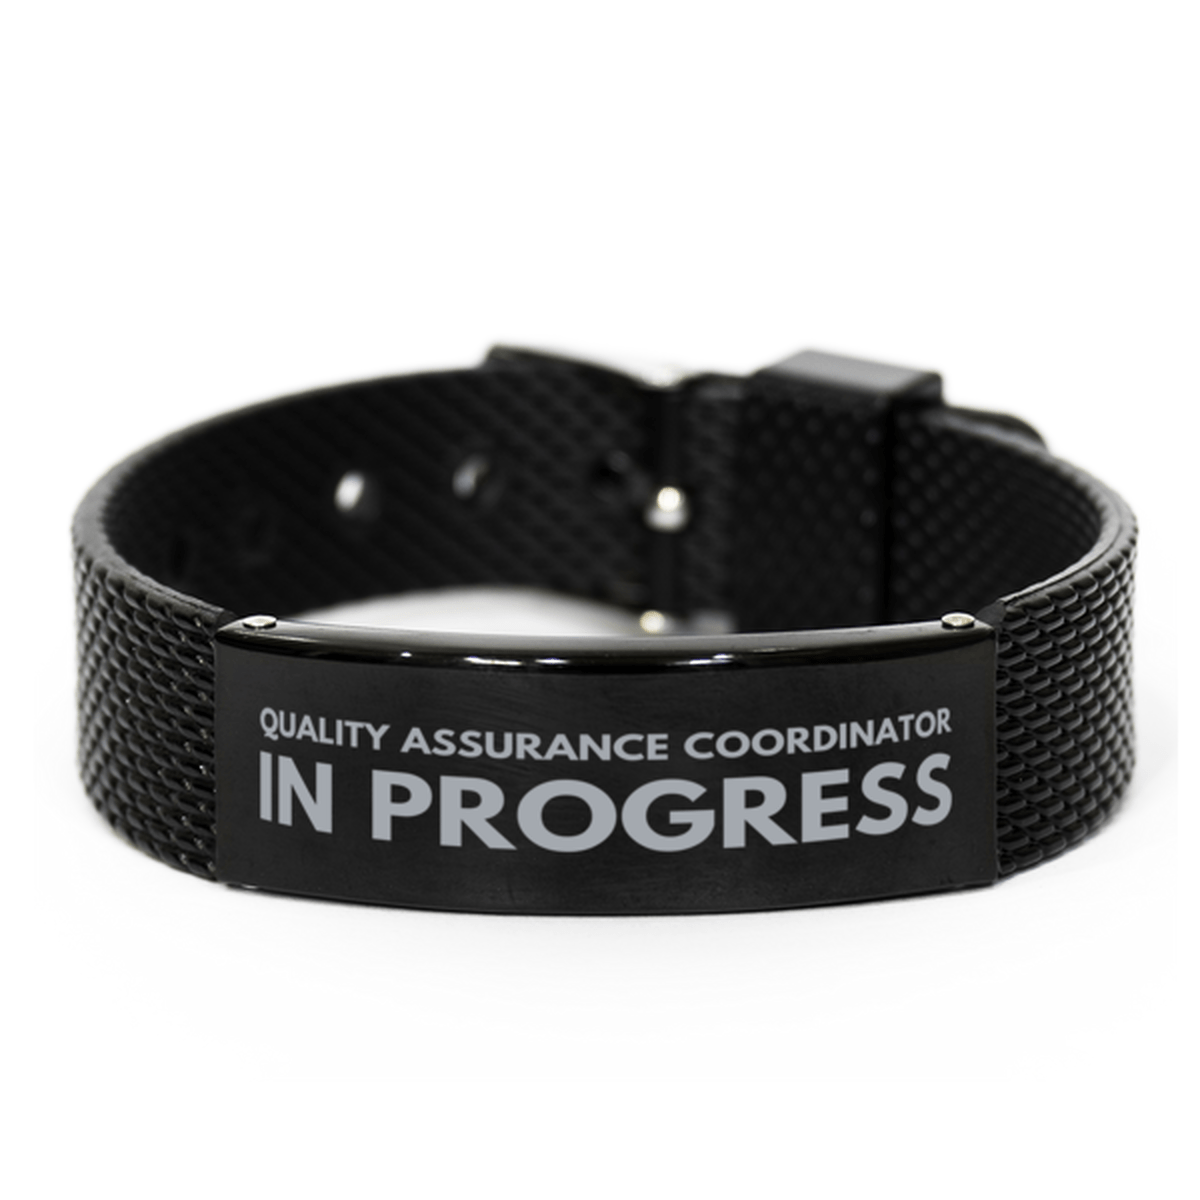 Inspirational Quality Assurance Coordinator Black Shark Mesh Bracelet, Quality Assurance Coordinator In Progress, Best Graduation Gifts for Students